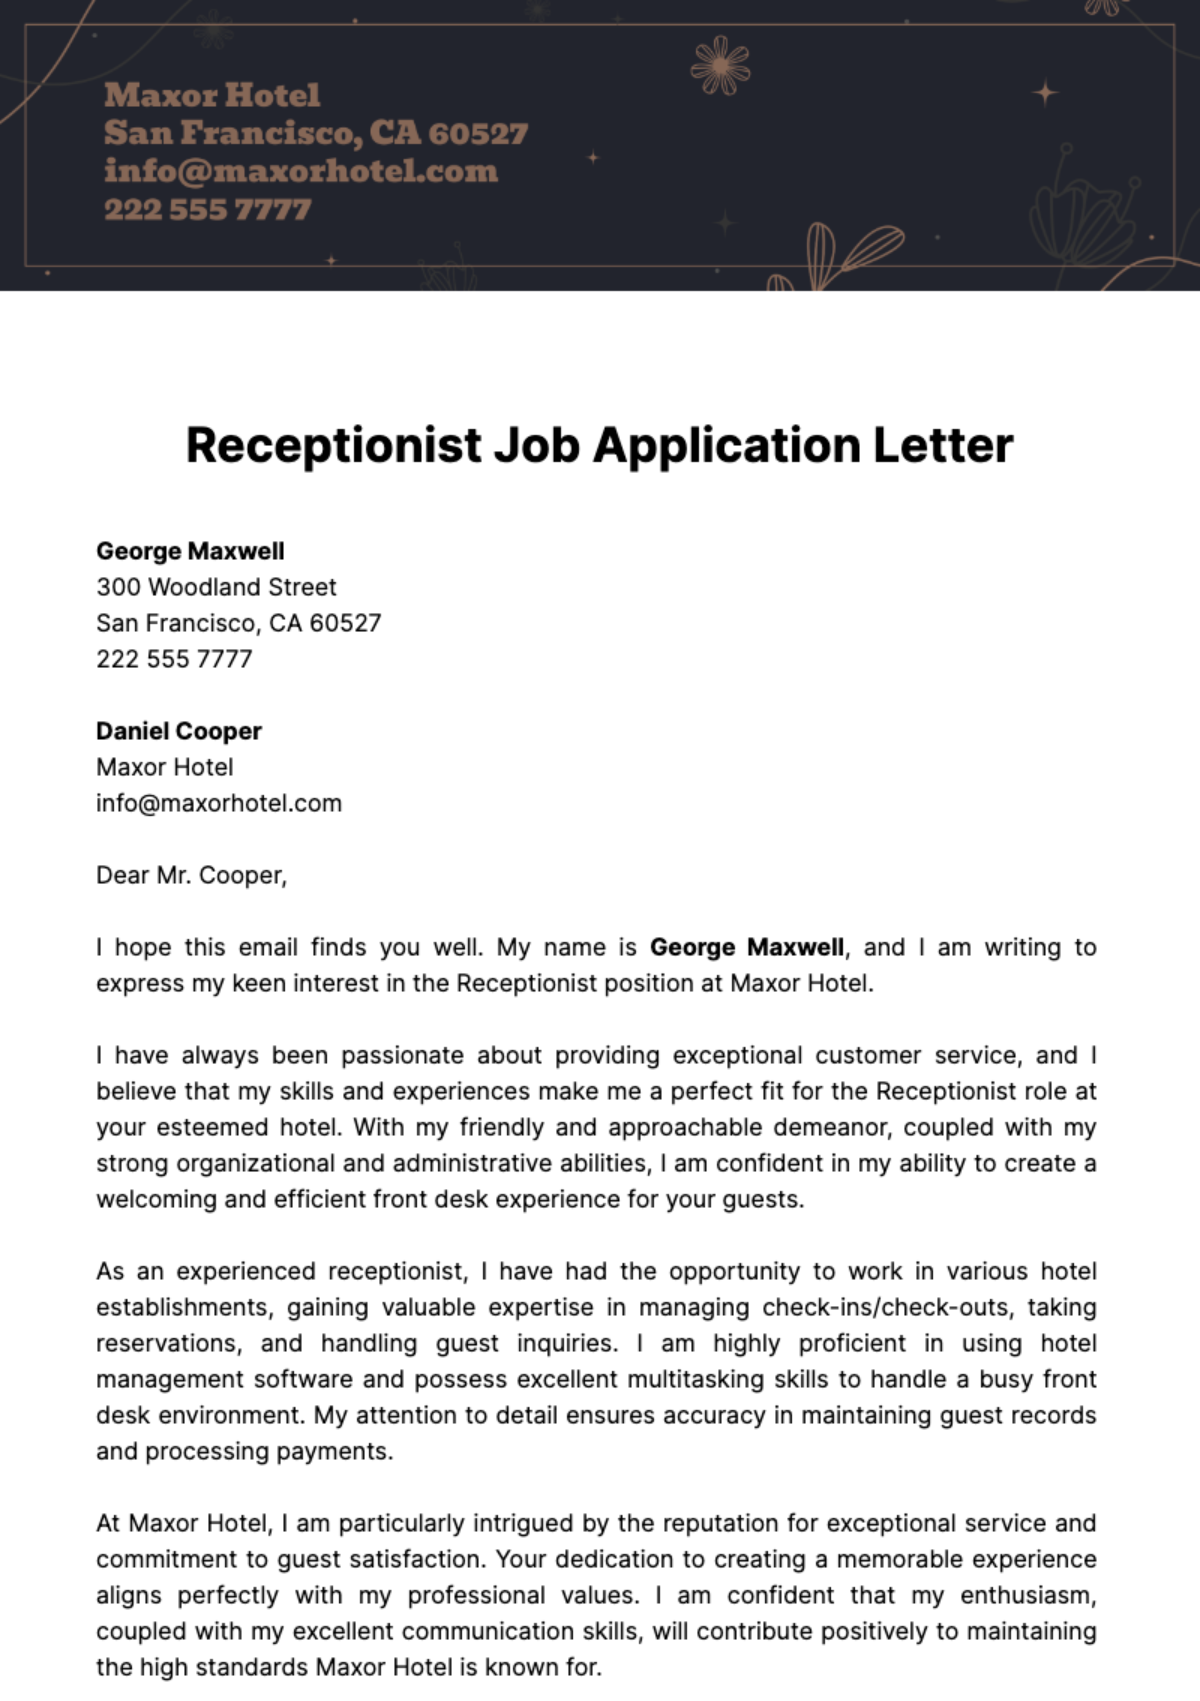 Free Receptionist Job Application Letter  Template